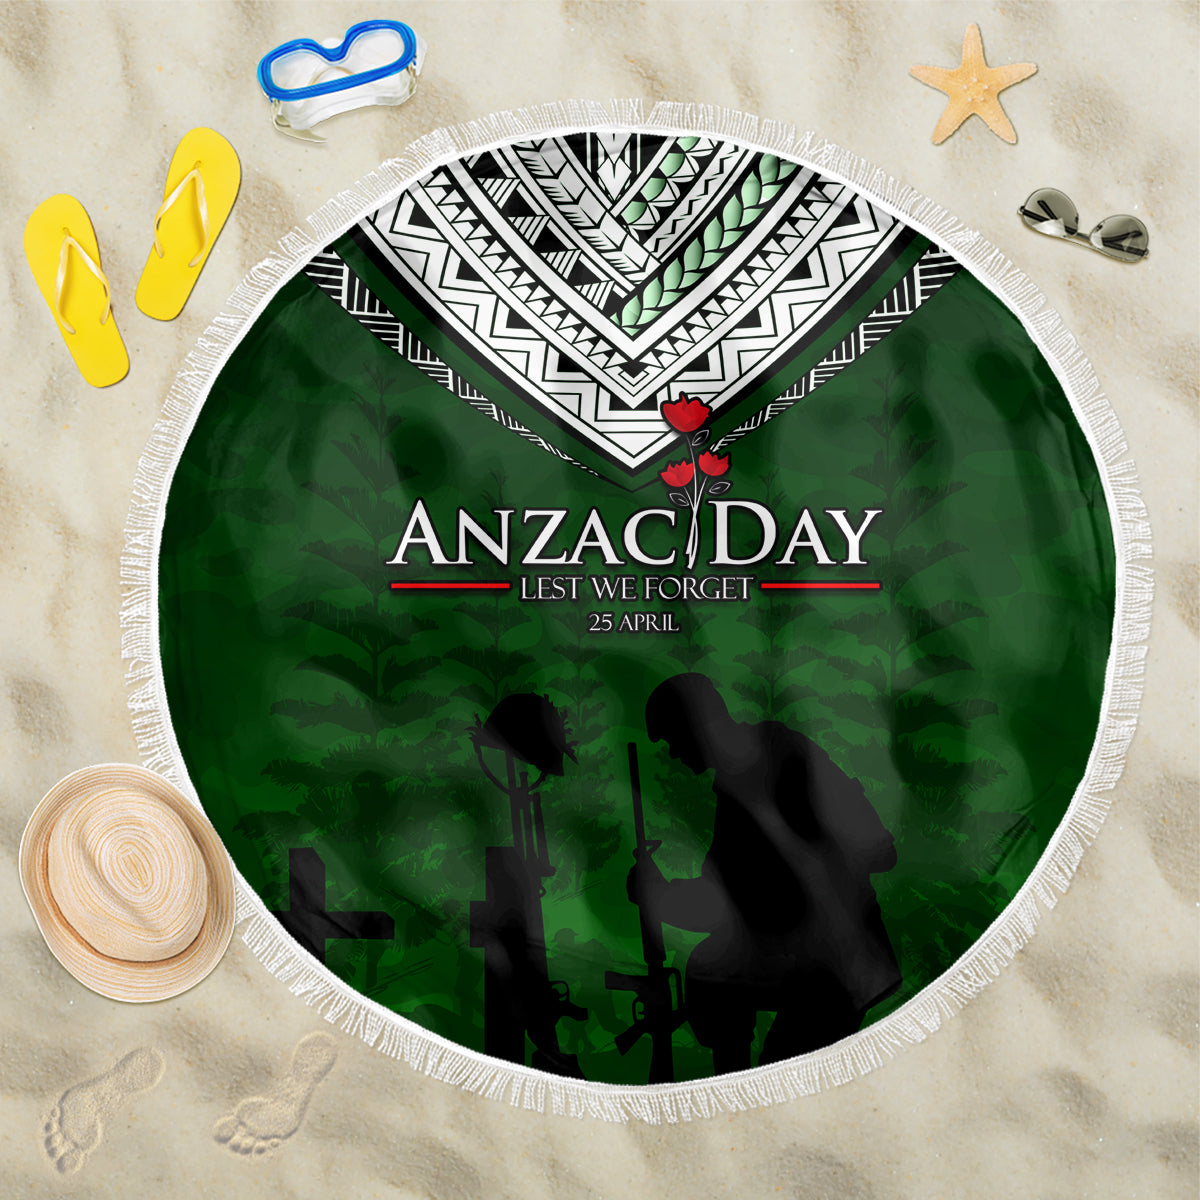 Norfolk Island ANZAC Day Beach Blanket Soldier Lest We Forget Camouflage LT03 One Size 150cm Green - Polynesian Pride